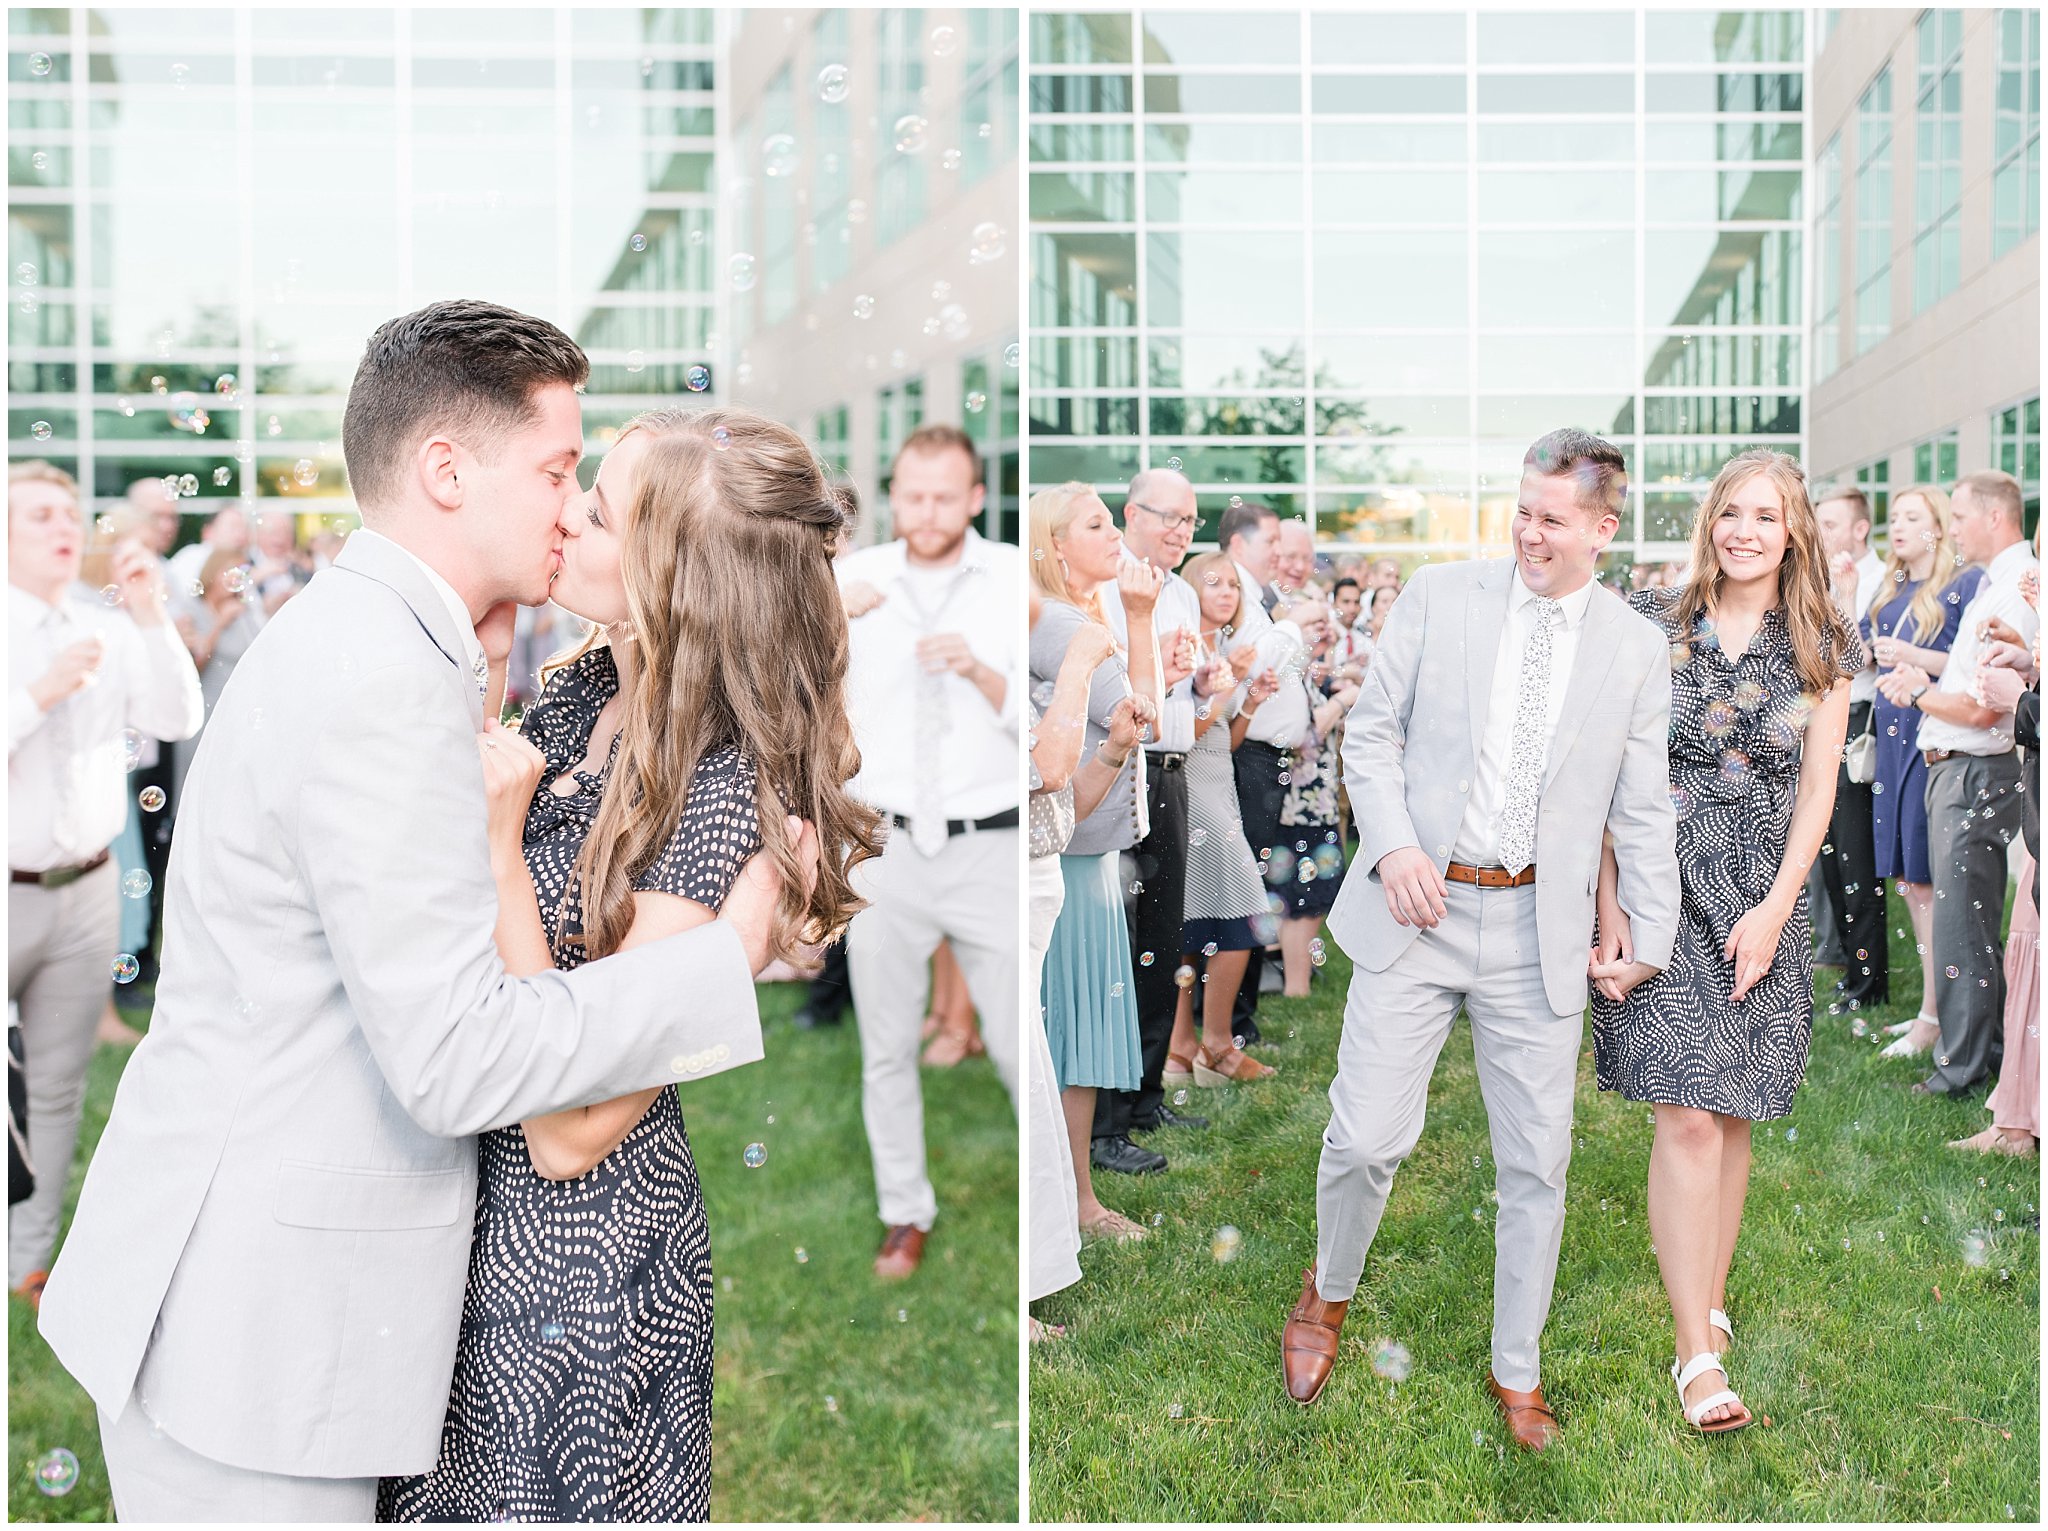 Outdoor wedding bubble exit sendoff | Salt Lake Temple Wedding and Clearfield City Hall Reception | Utah Wedding Photographers | Jessie and Dallin Photography